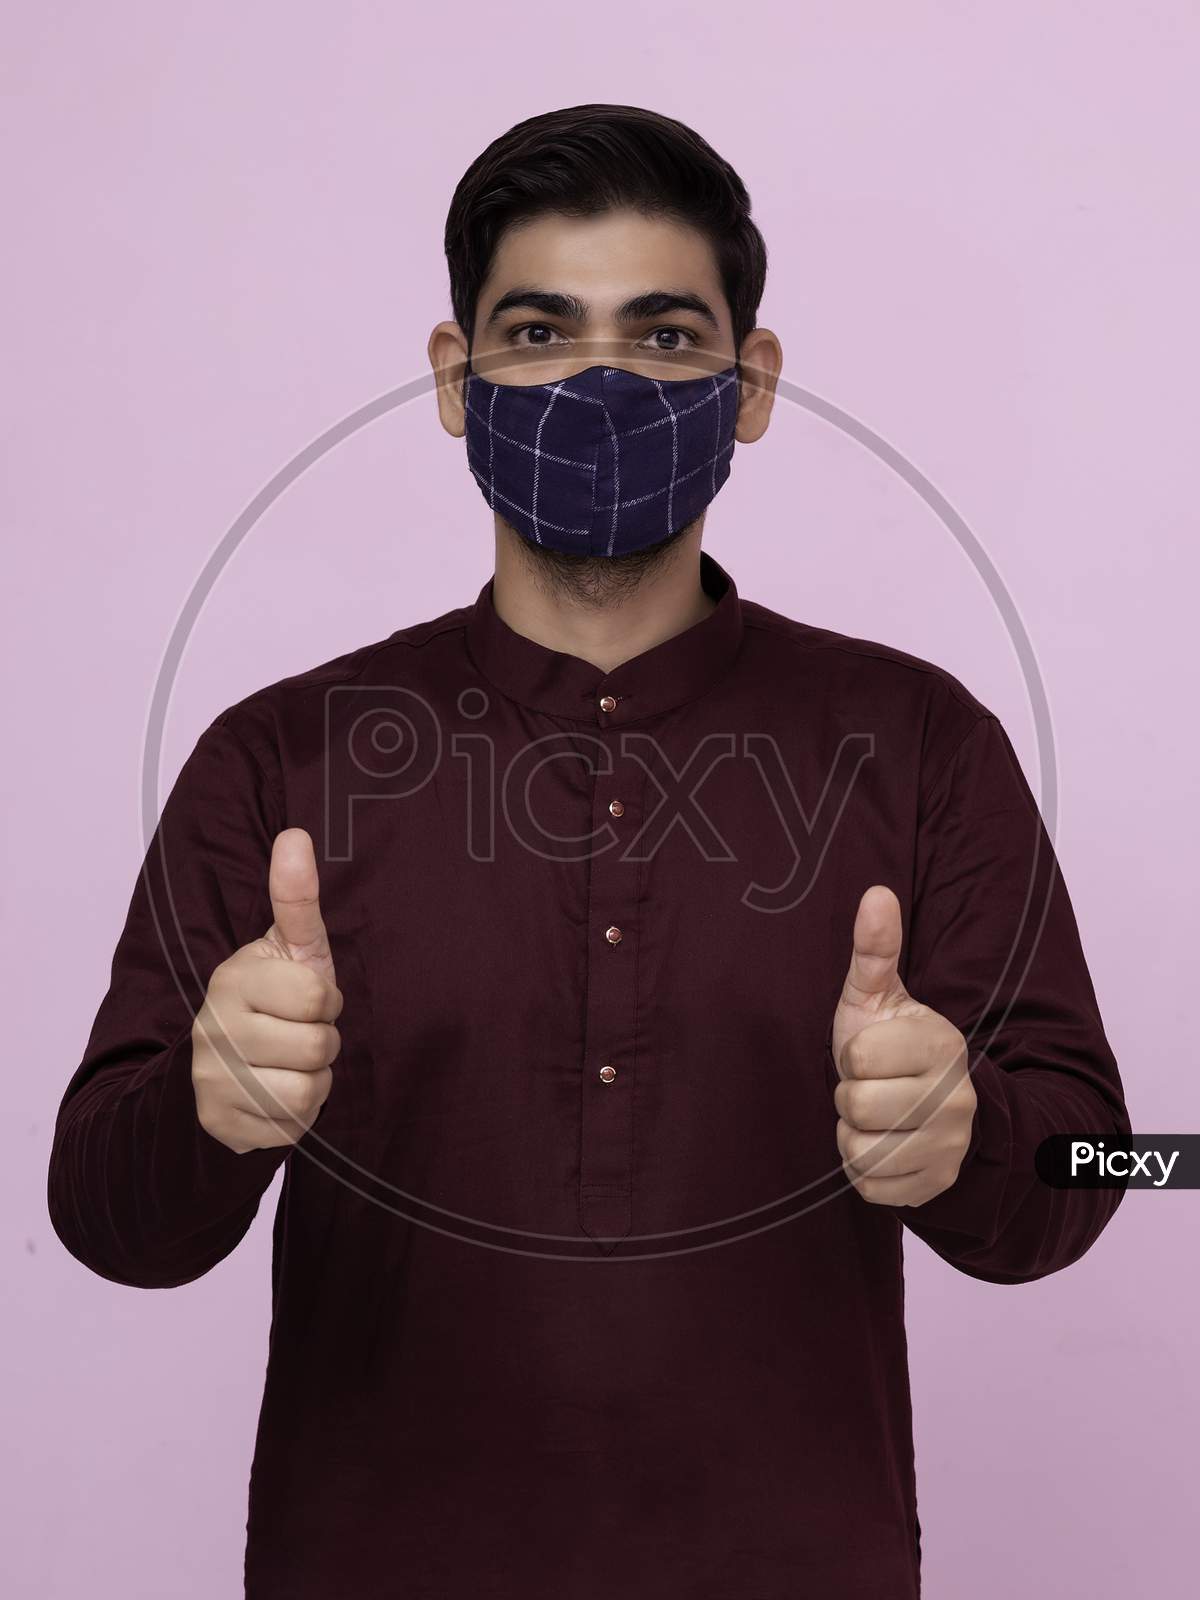 Indian Adult Boy Wearing Mask With Thumbs Up Gesture.